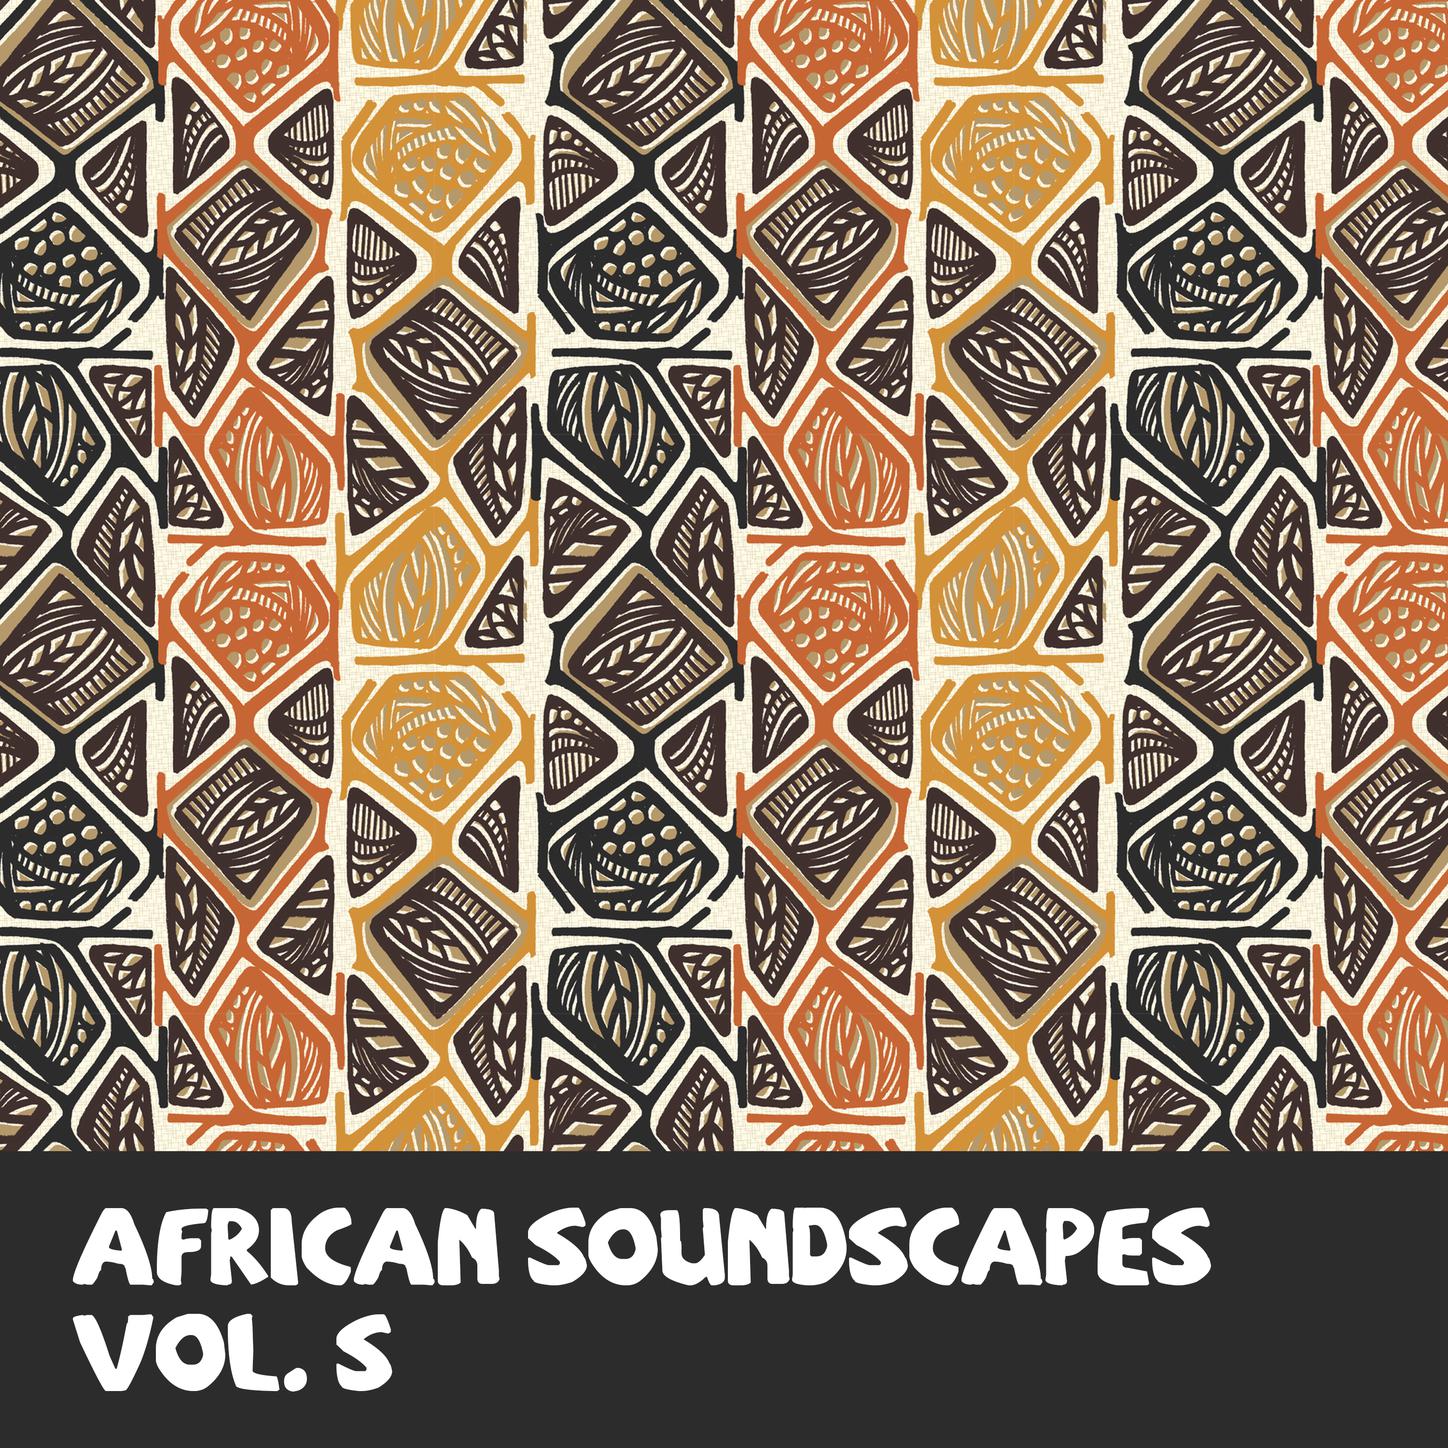 African Soundscapes Vol, 5